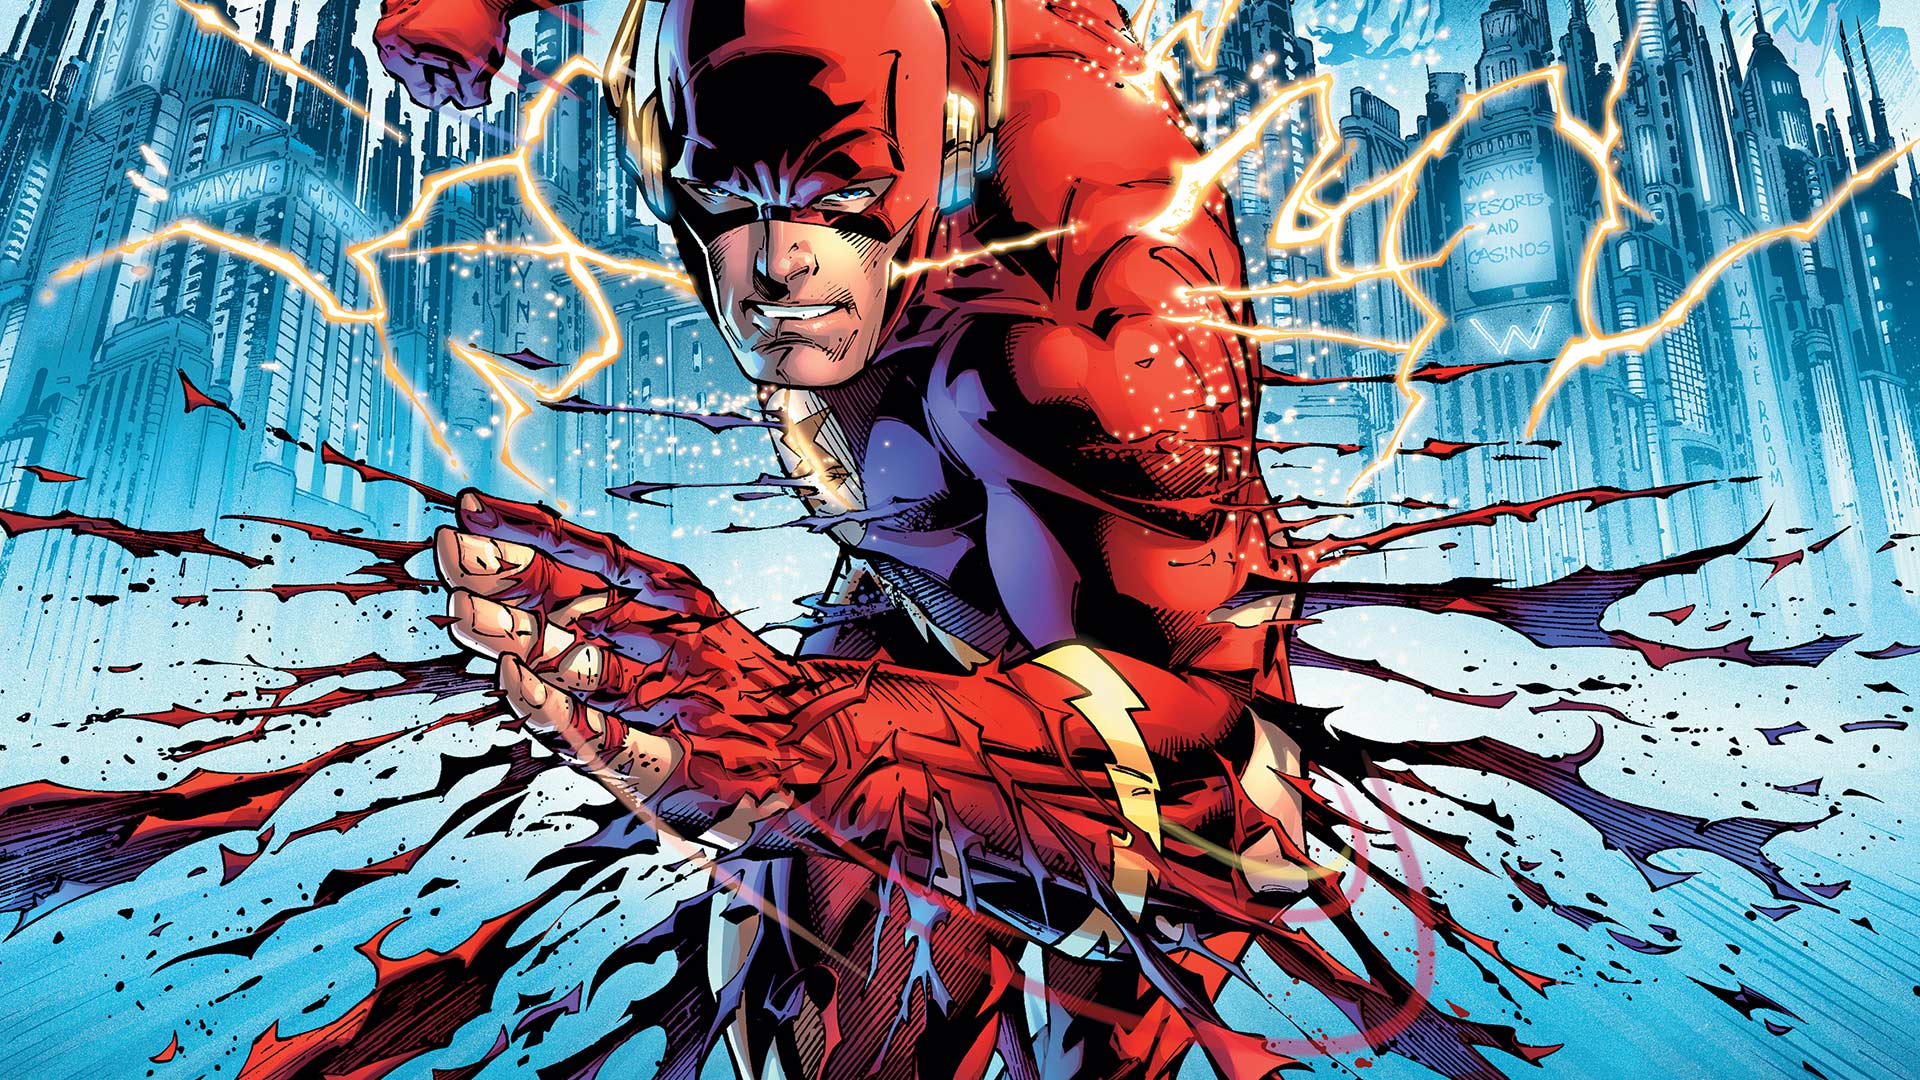 SDCC 2017: The Flash Movie will be an Adaptation of Flashpoint